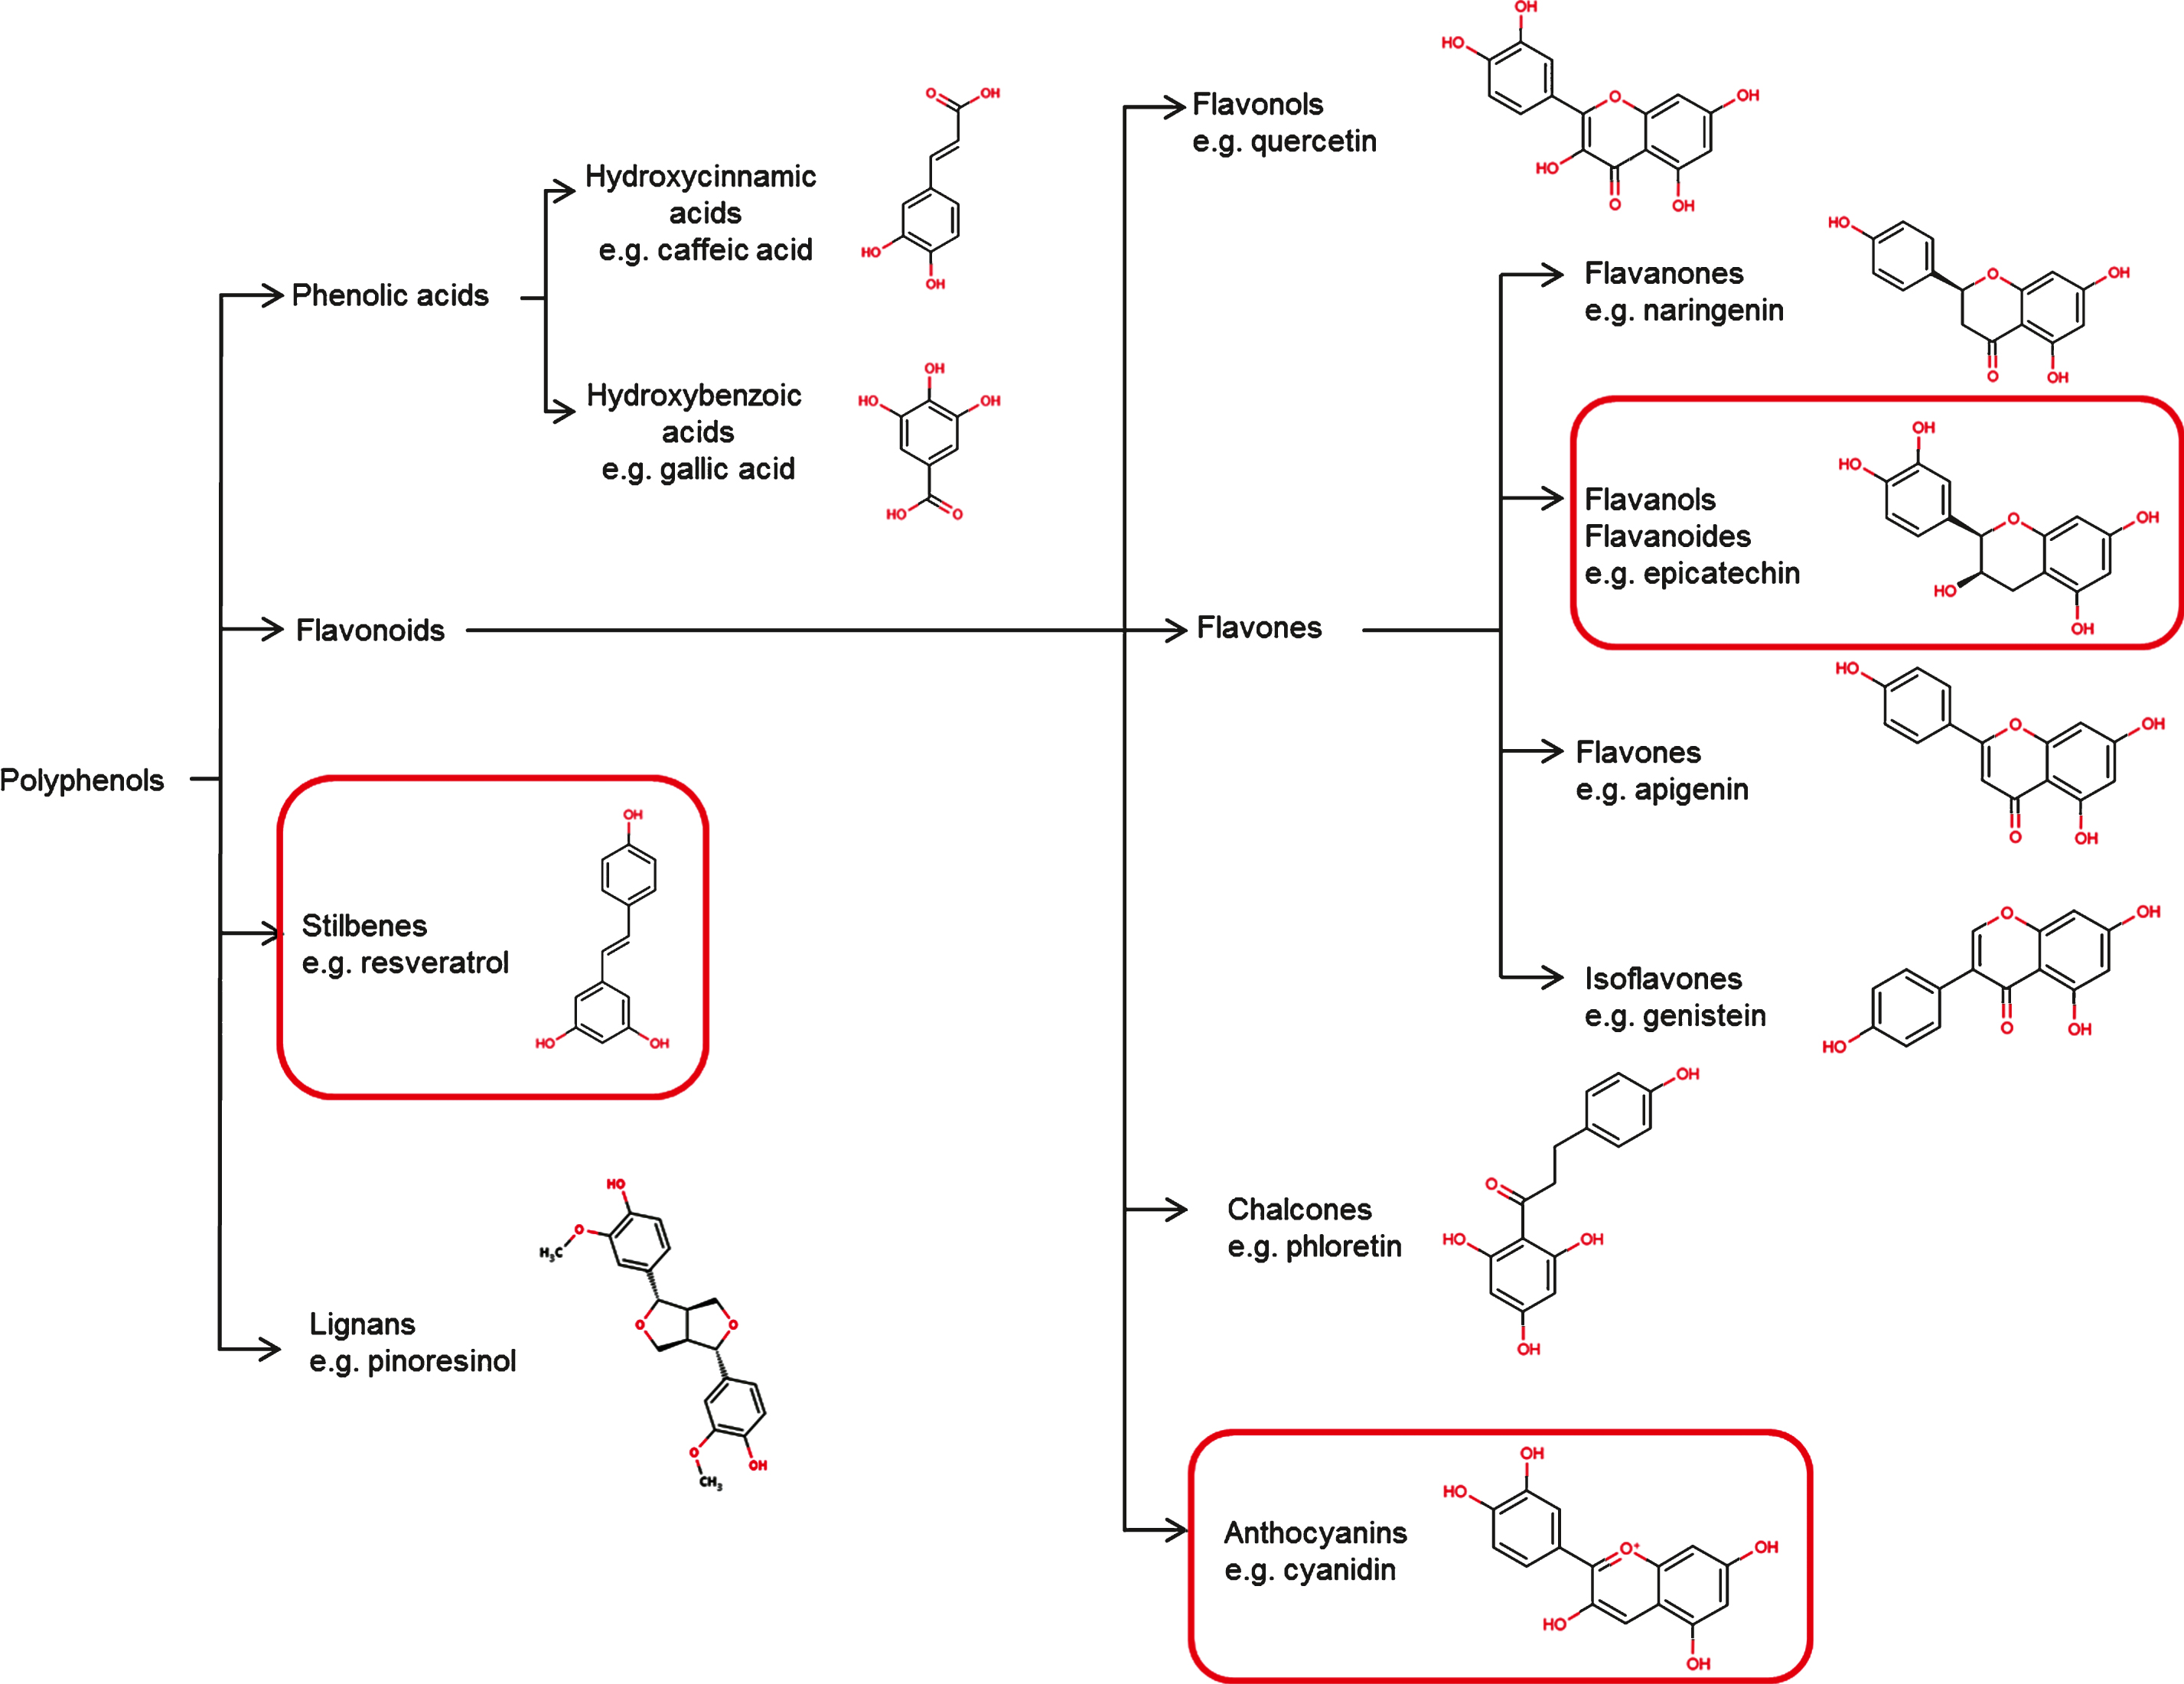 Classification and chemical structure of the main classes of polyphenols (modified from Spencer et al., 2008 [209]).